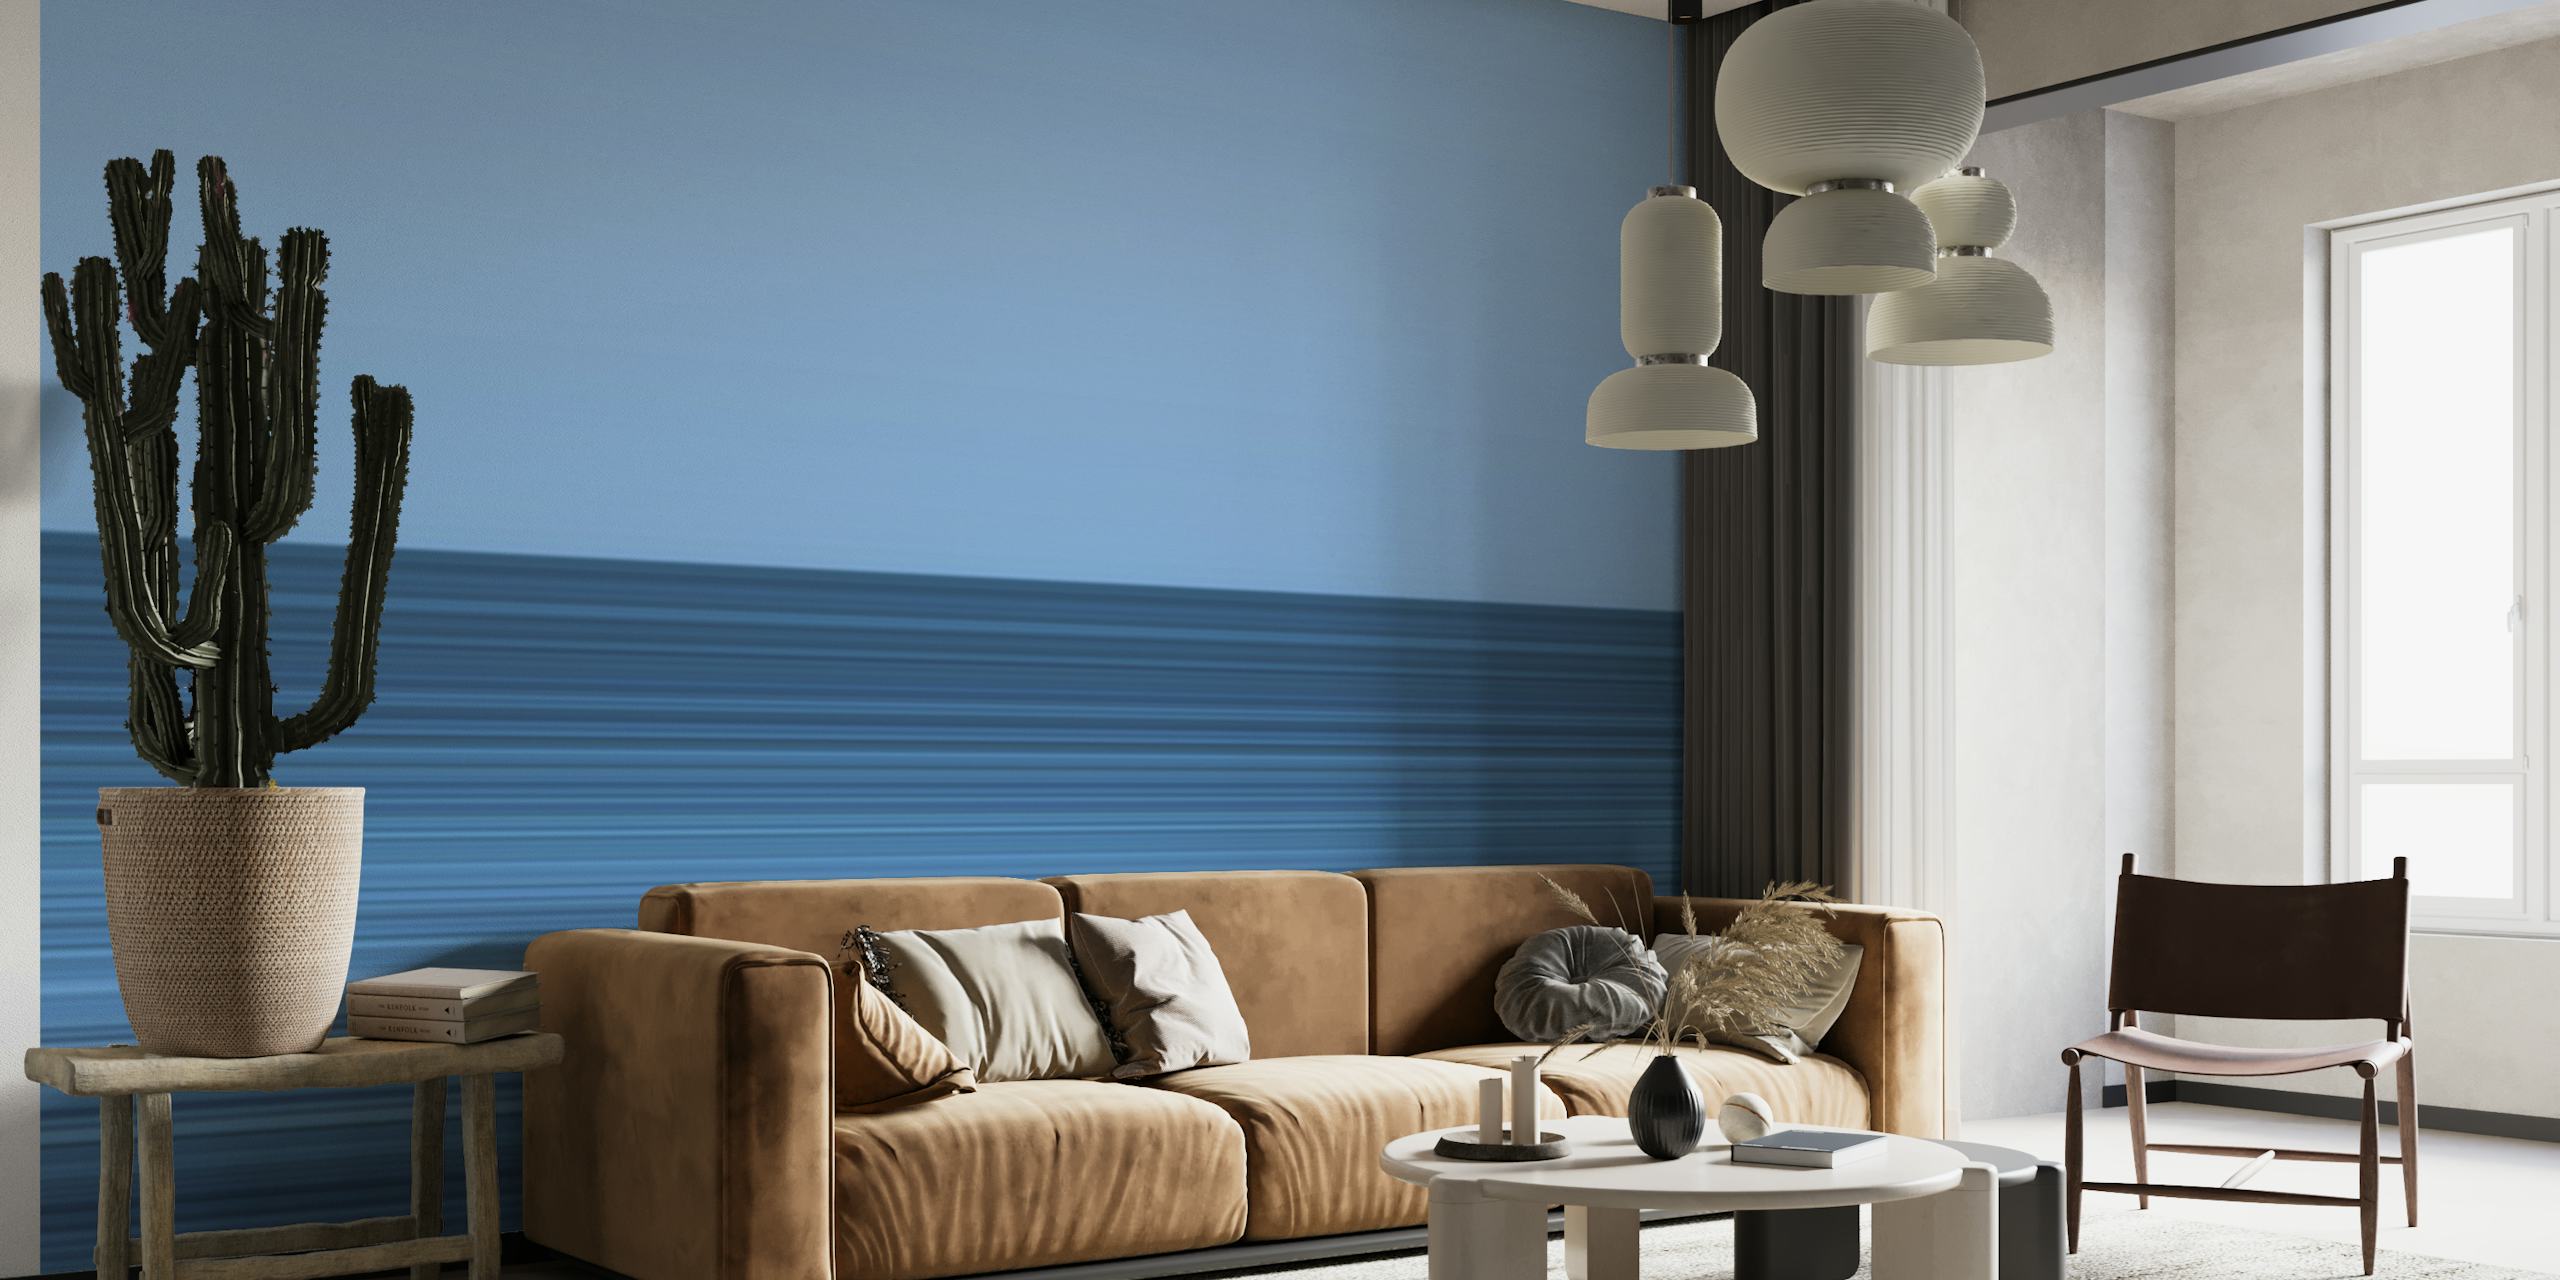 Abstract horizontal line pattern wall mural in shades of blue, inspired by the Philippines seascape